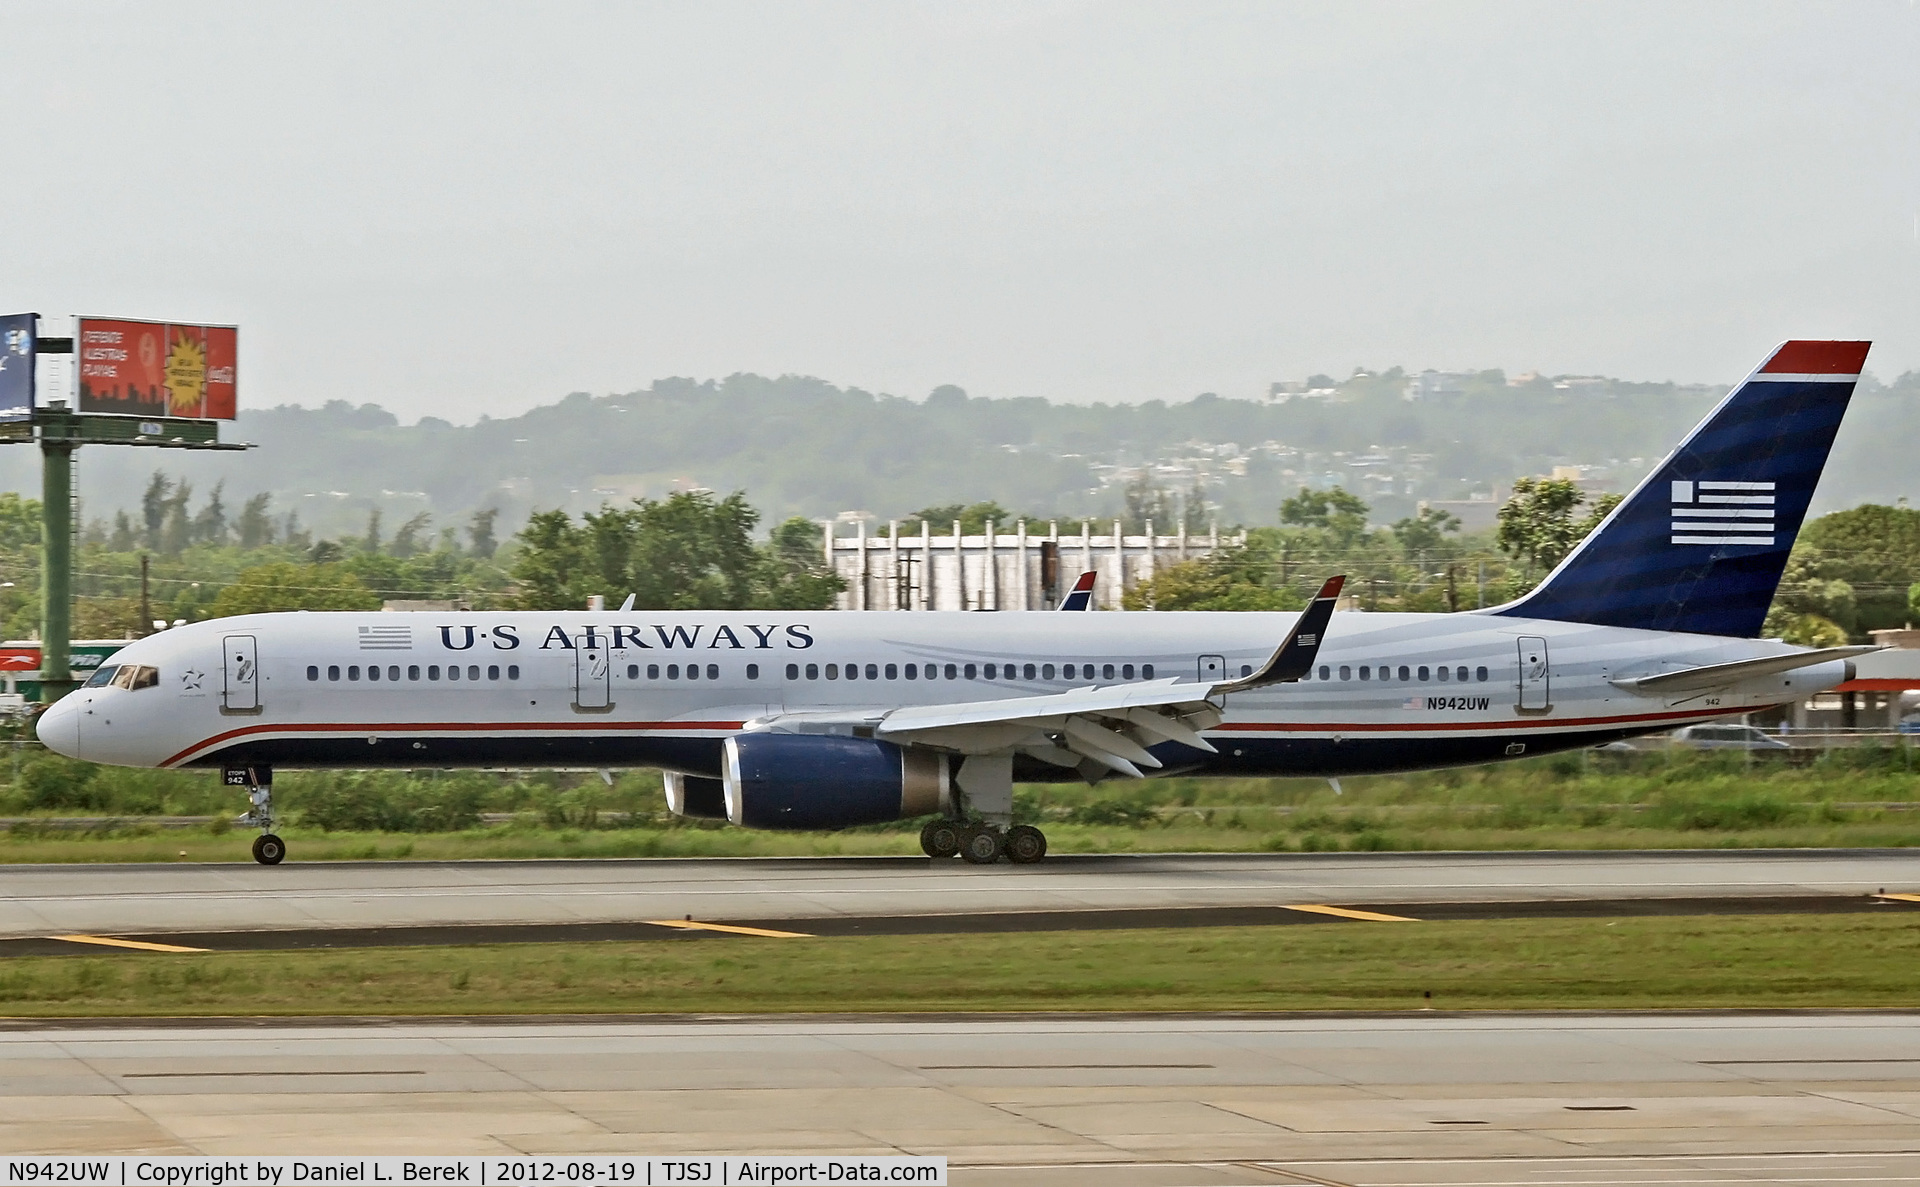 N942UW, 1995 Boeing 757-2B7 C/N 27807, This US Airways 757 is rolling to a stop, its spoilers and flaps still extended.